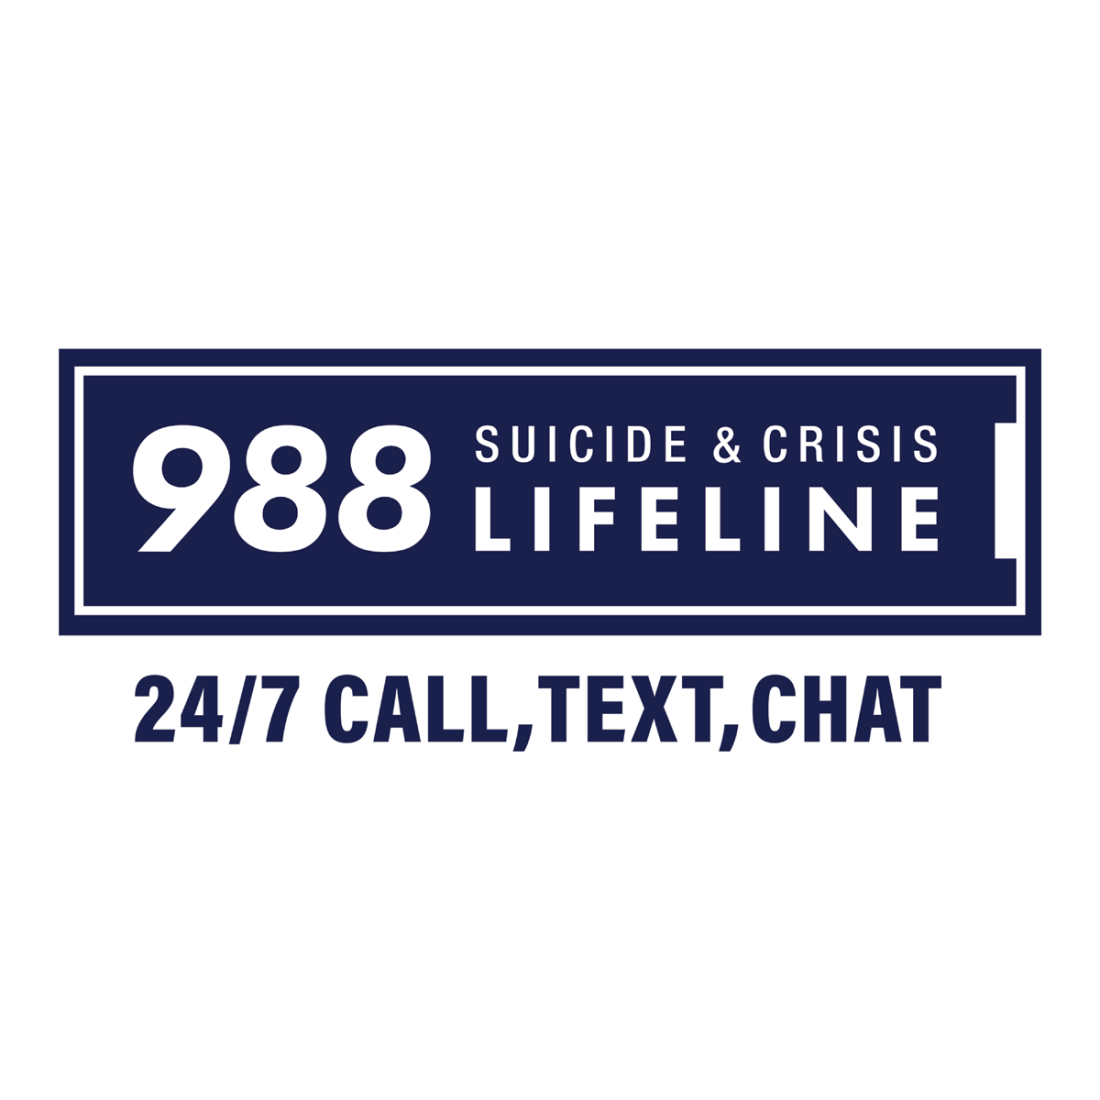 988 Suicide & Crisis Lifeline - 24/7 call, text, chat on a white background